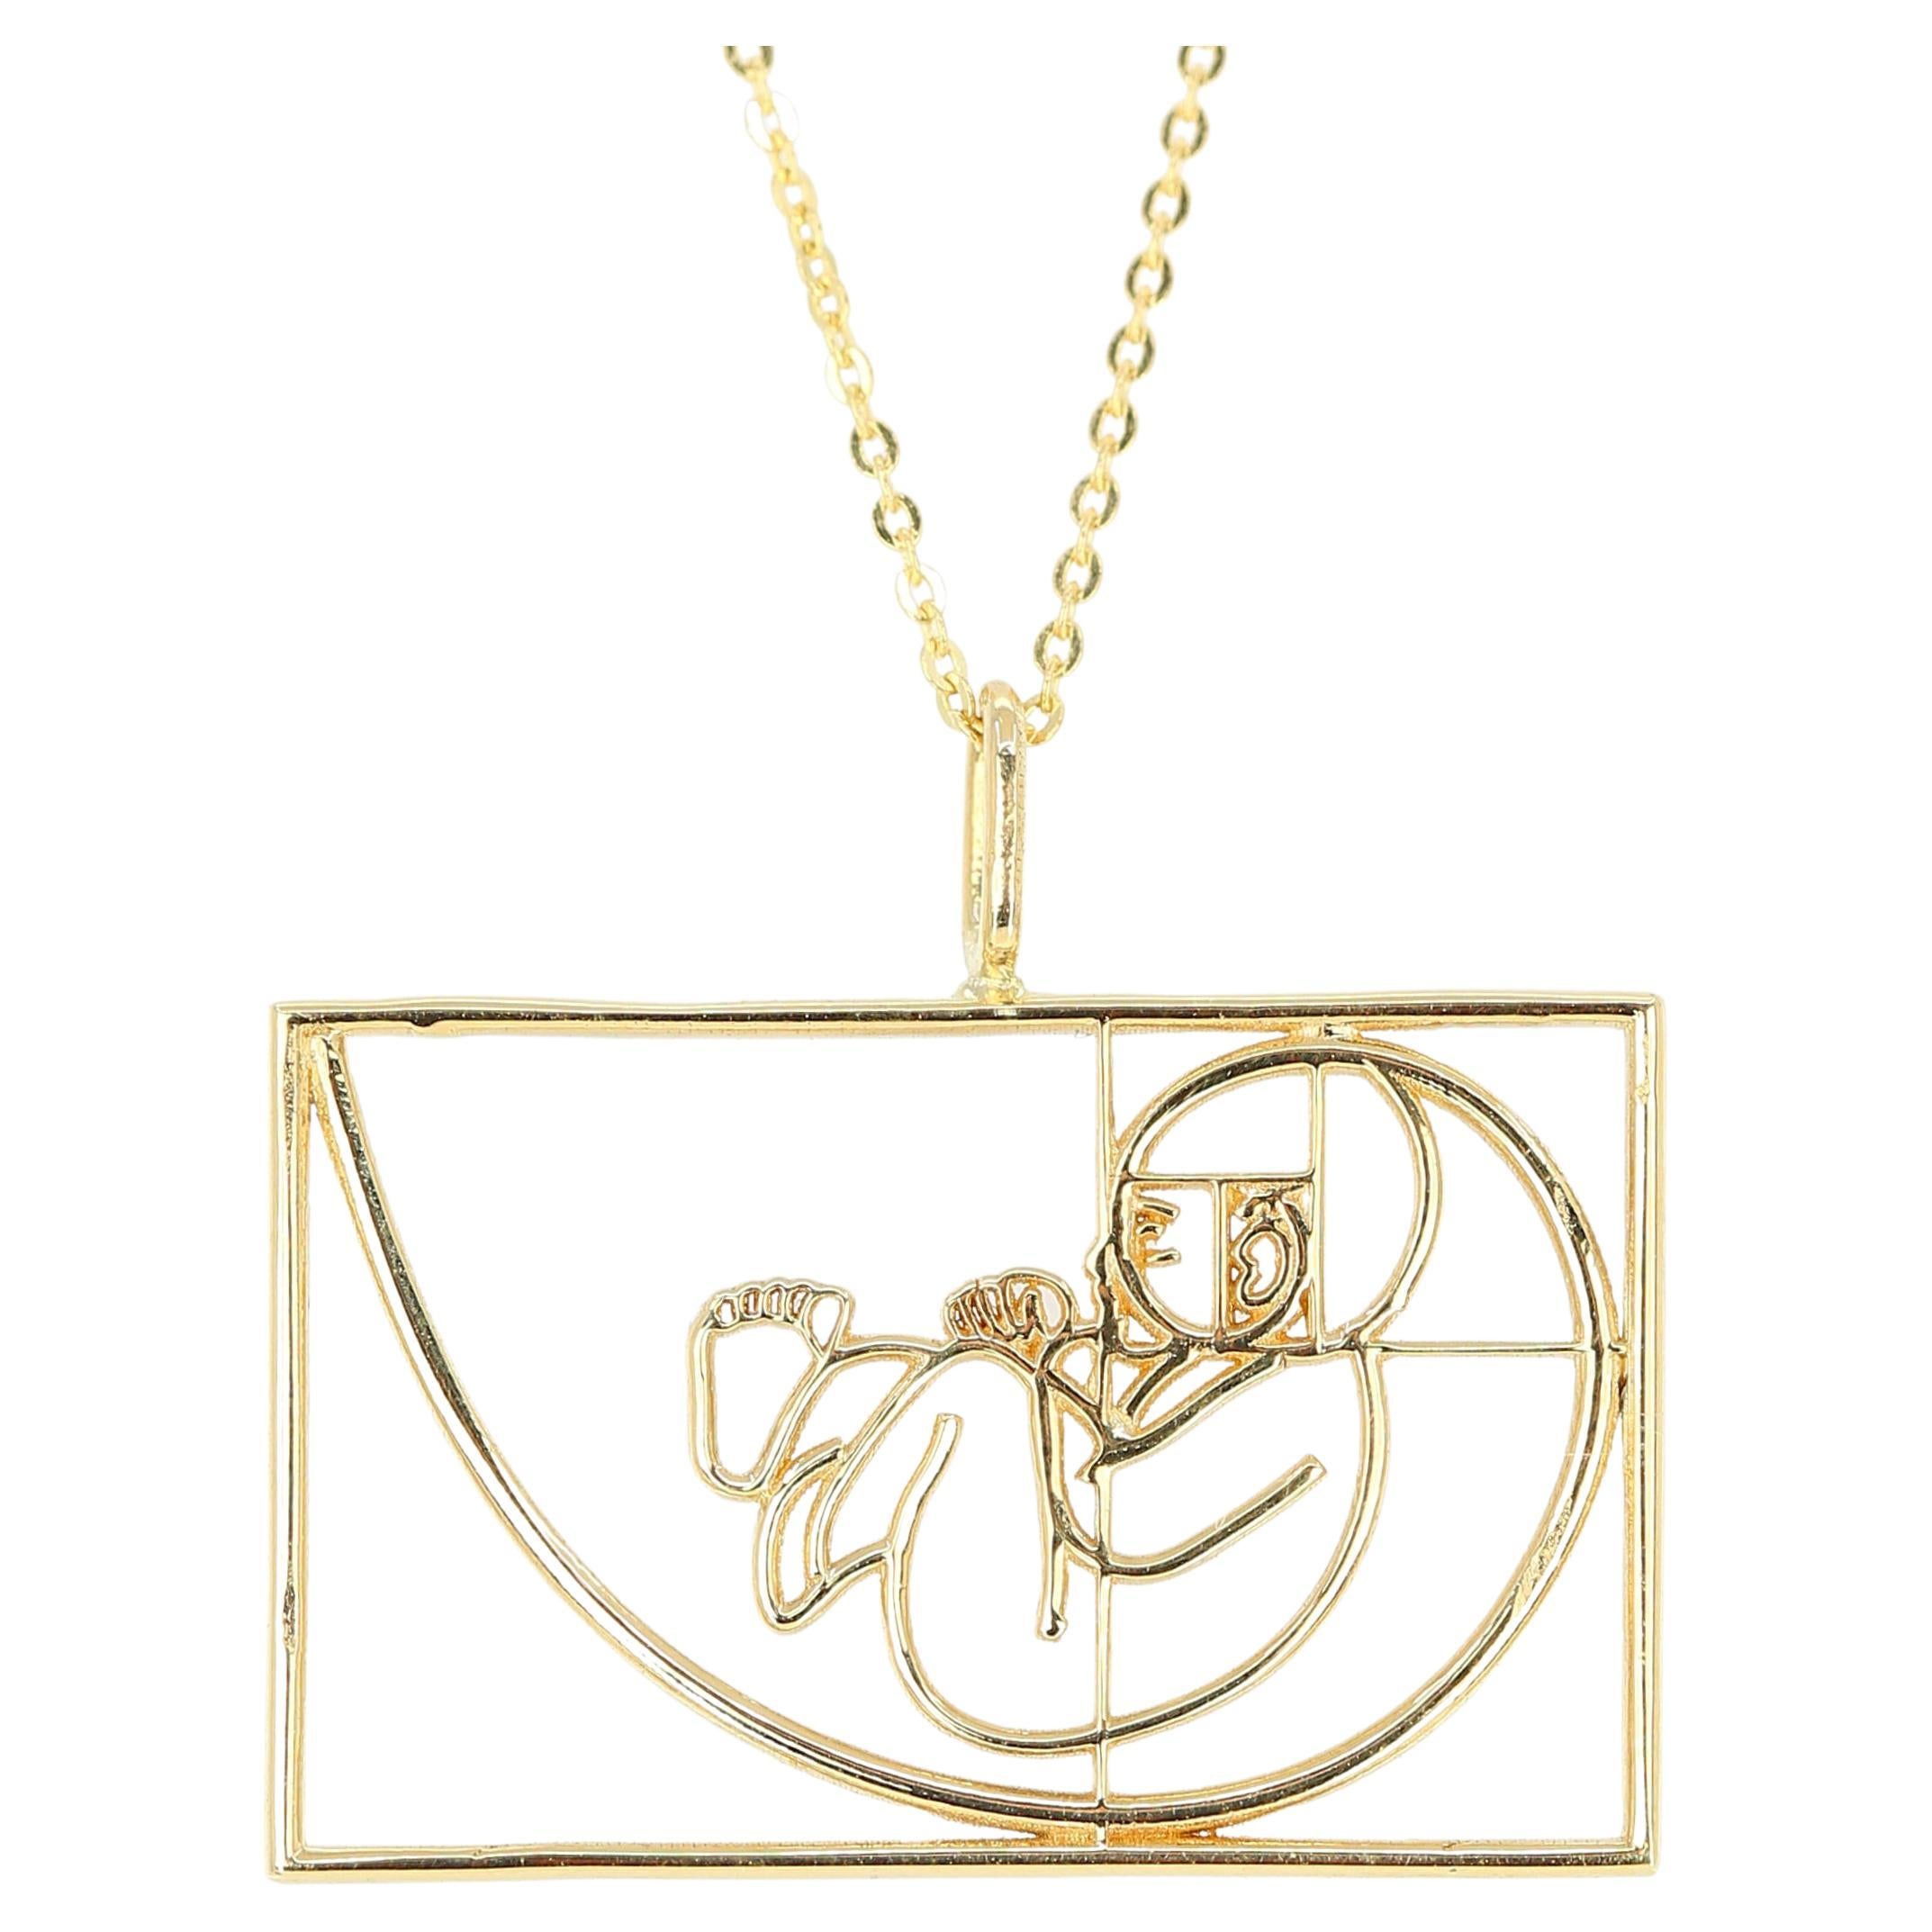 Baby in the Womb Necklace with Pendant 14K Gold, Golden Ratio Necklace For Sale